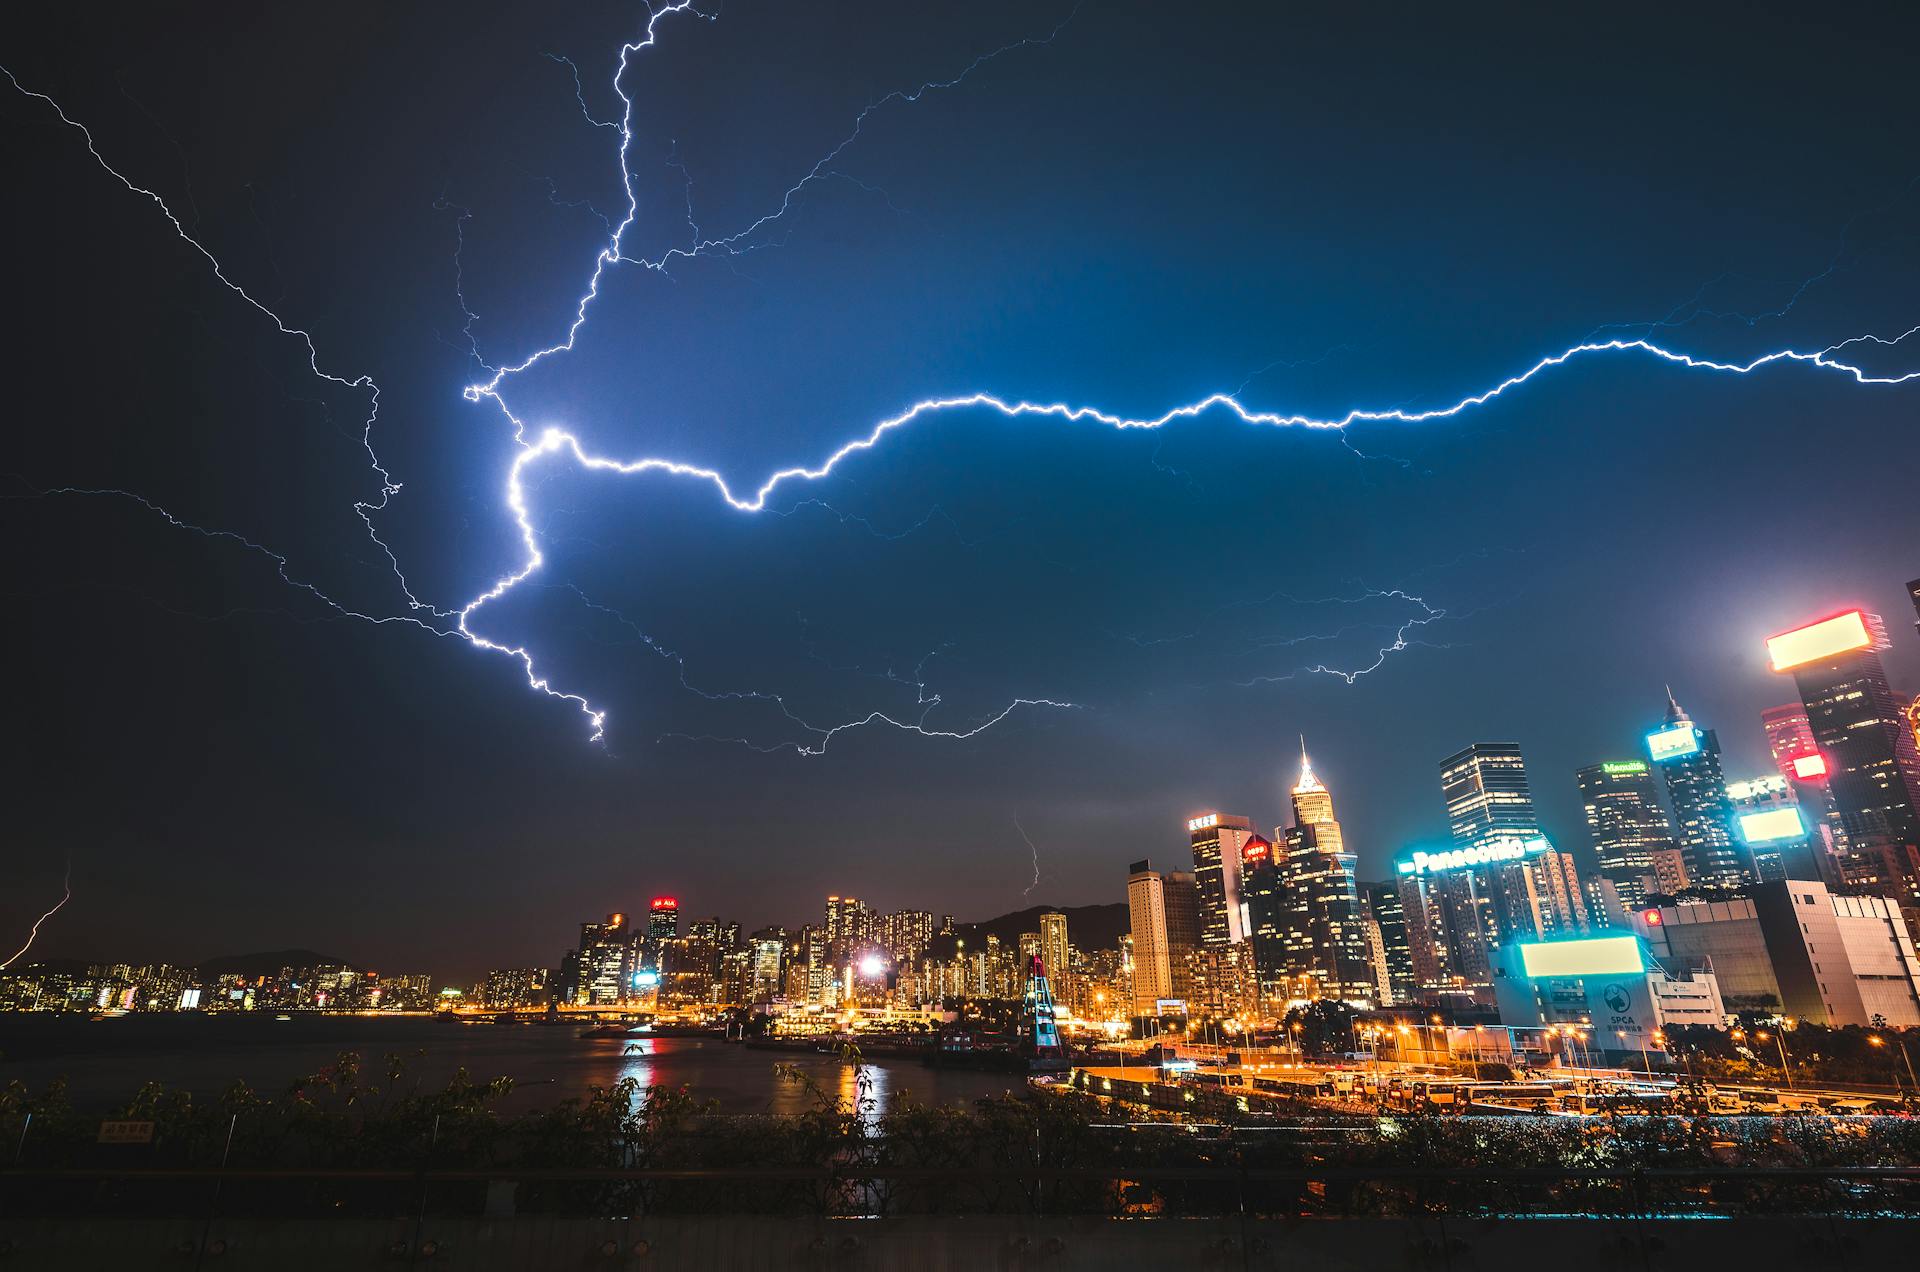 Lightning over city by Nick Kwan